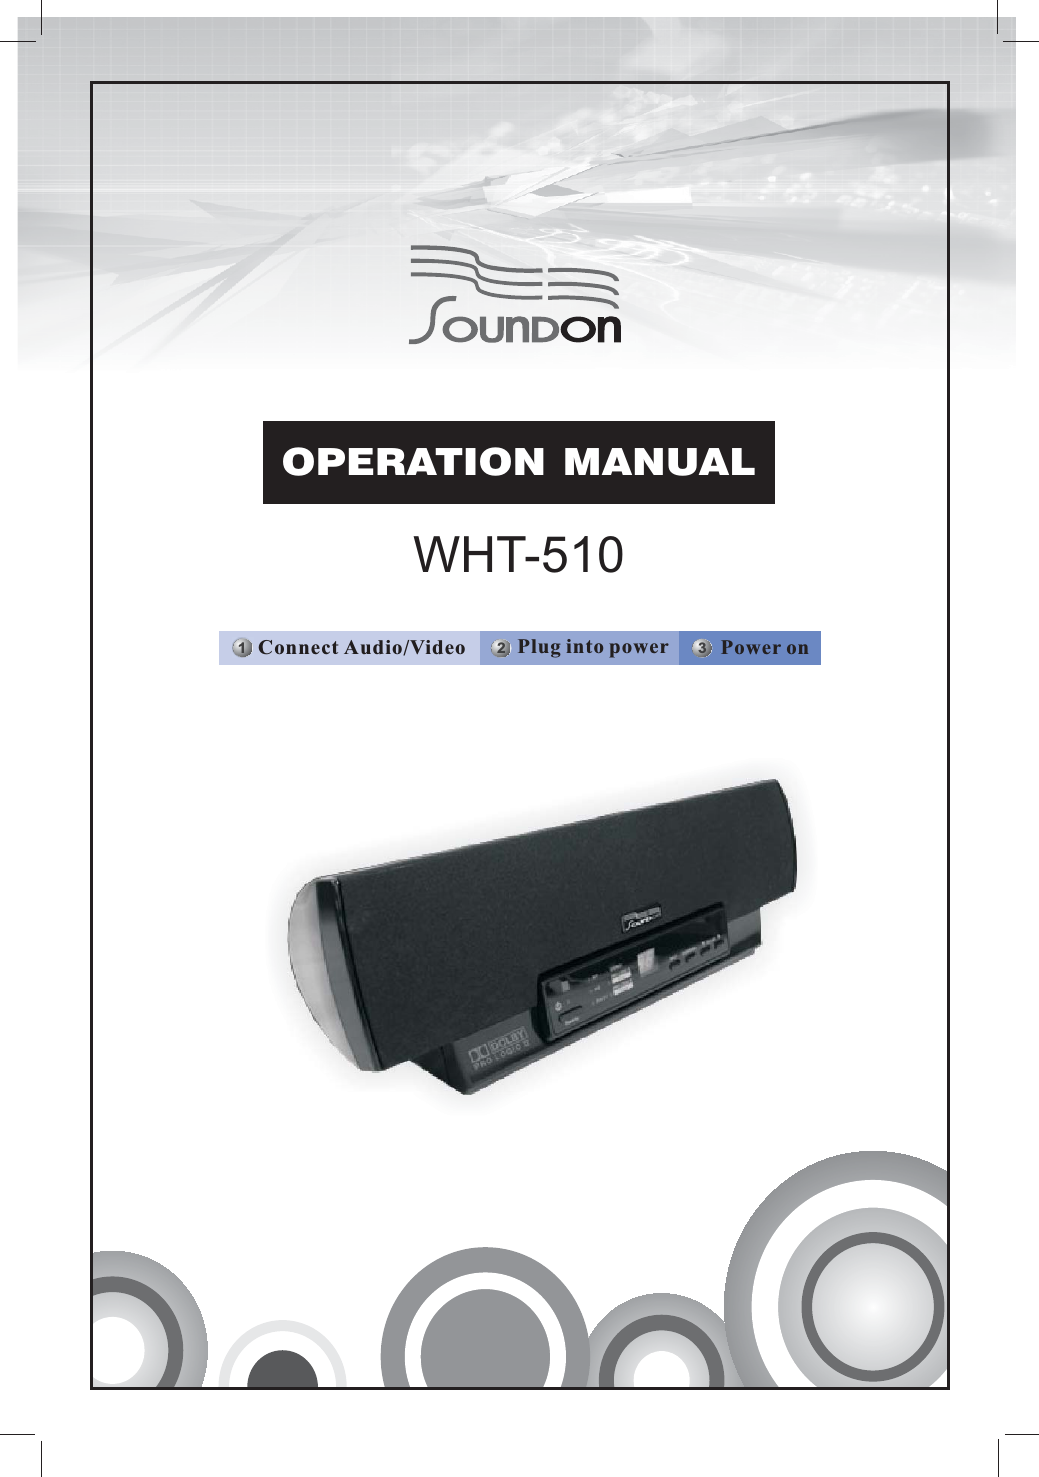 WHT-510OPERATION MANUAL231Power onPlug into powerConnect Audio/Video